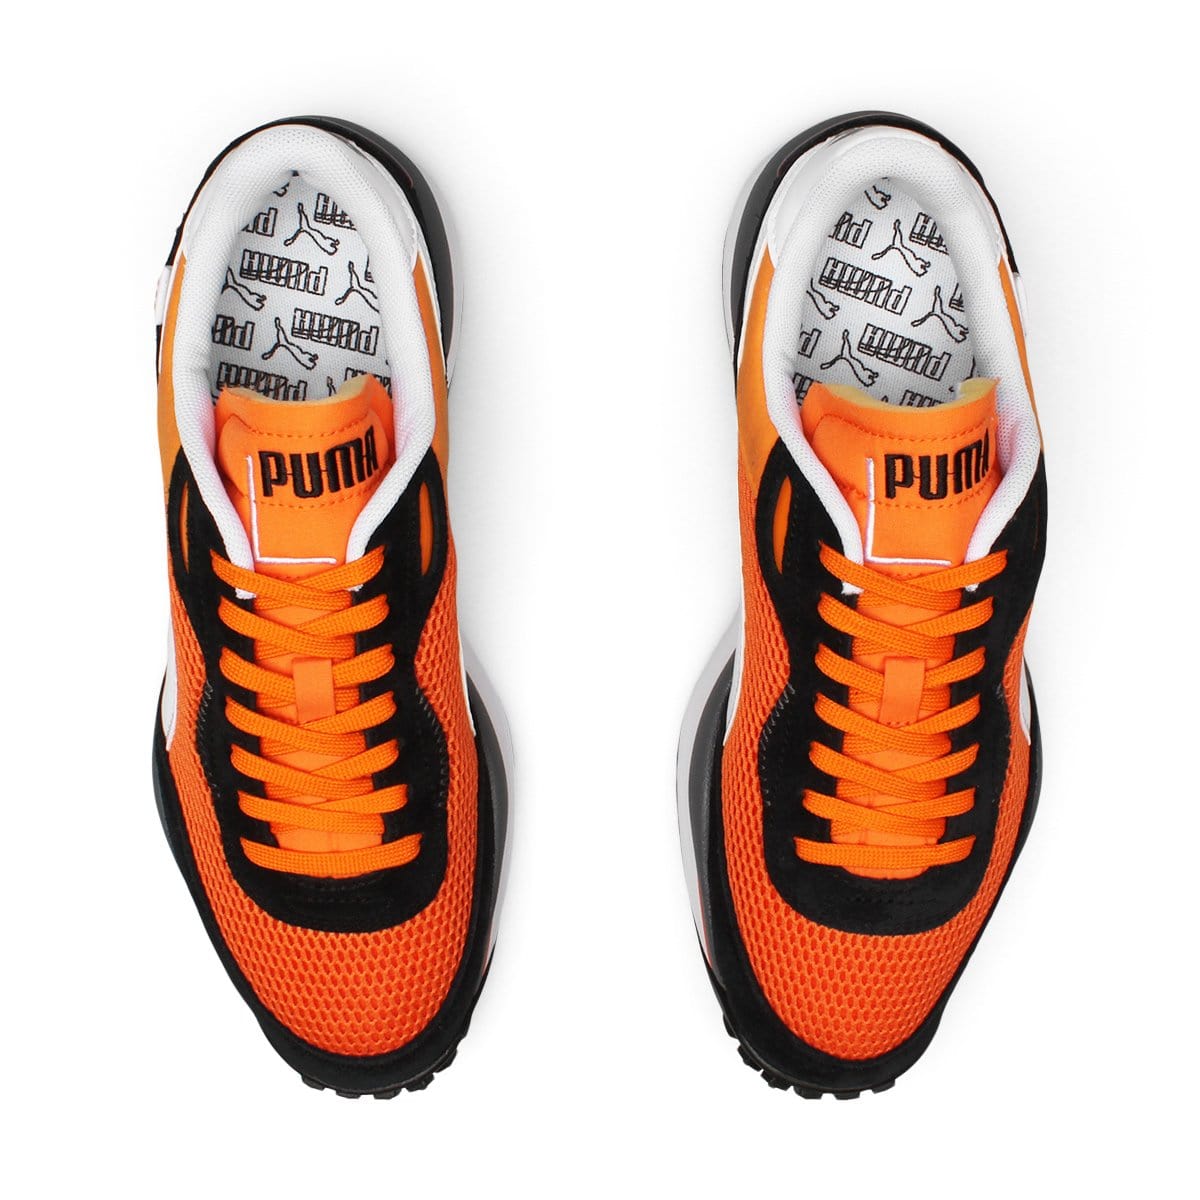 Puma Sneakers STYLE RIDER OG